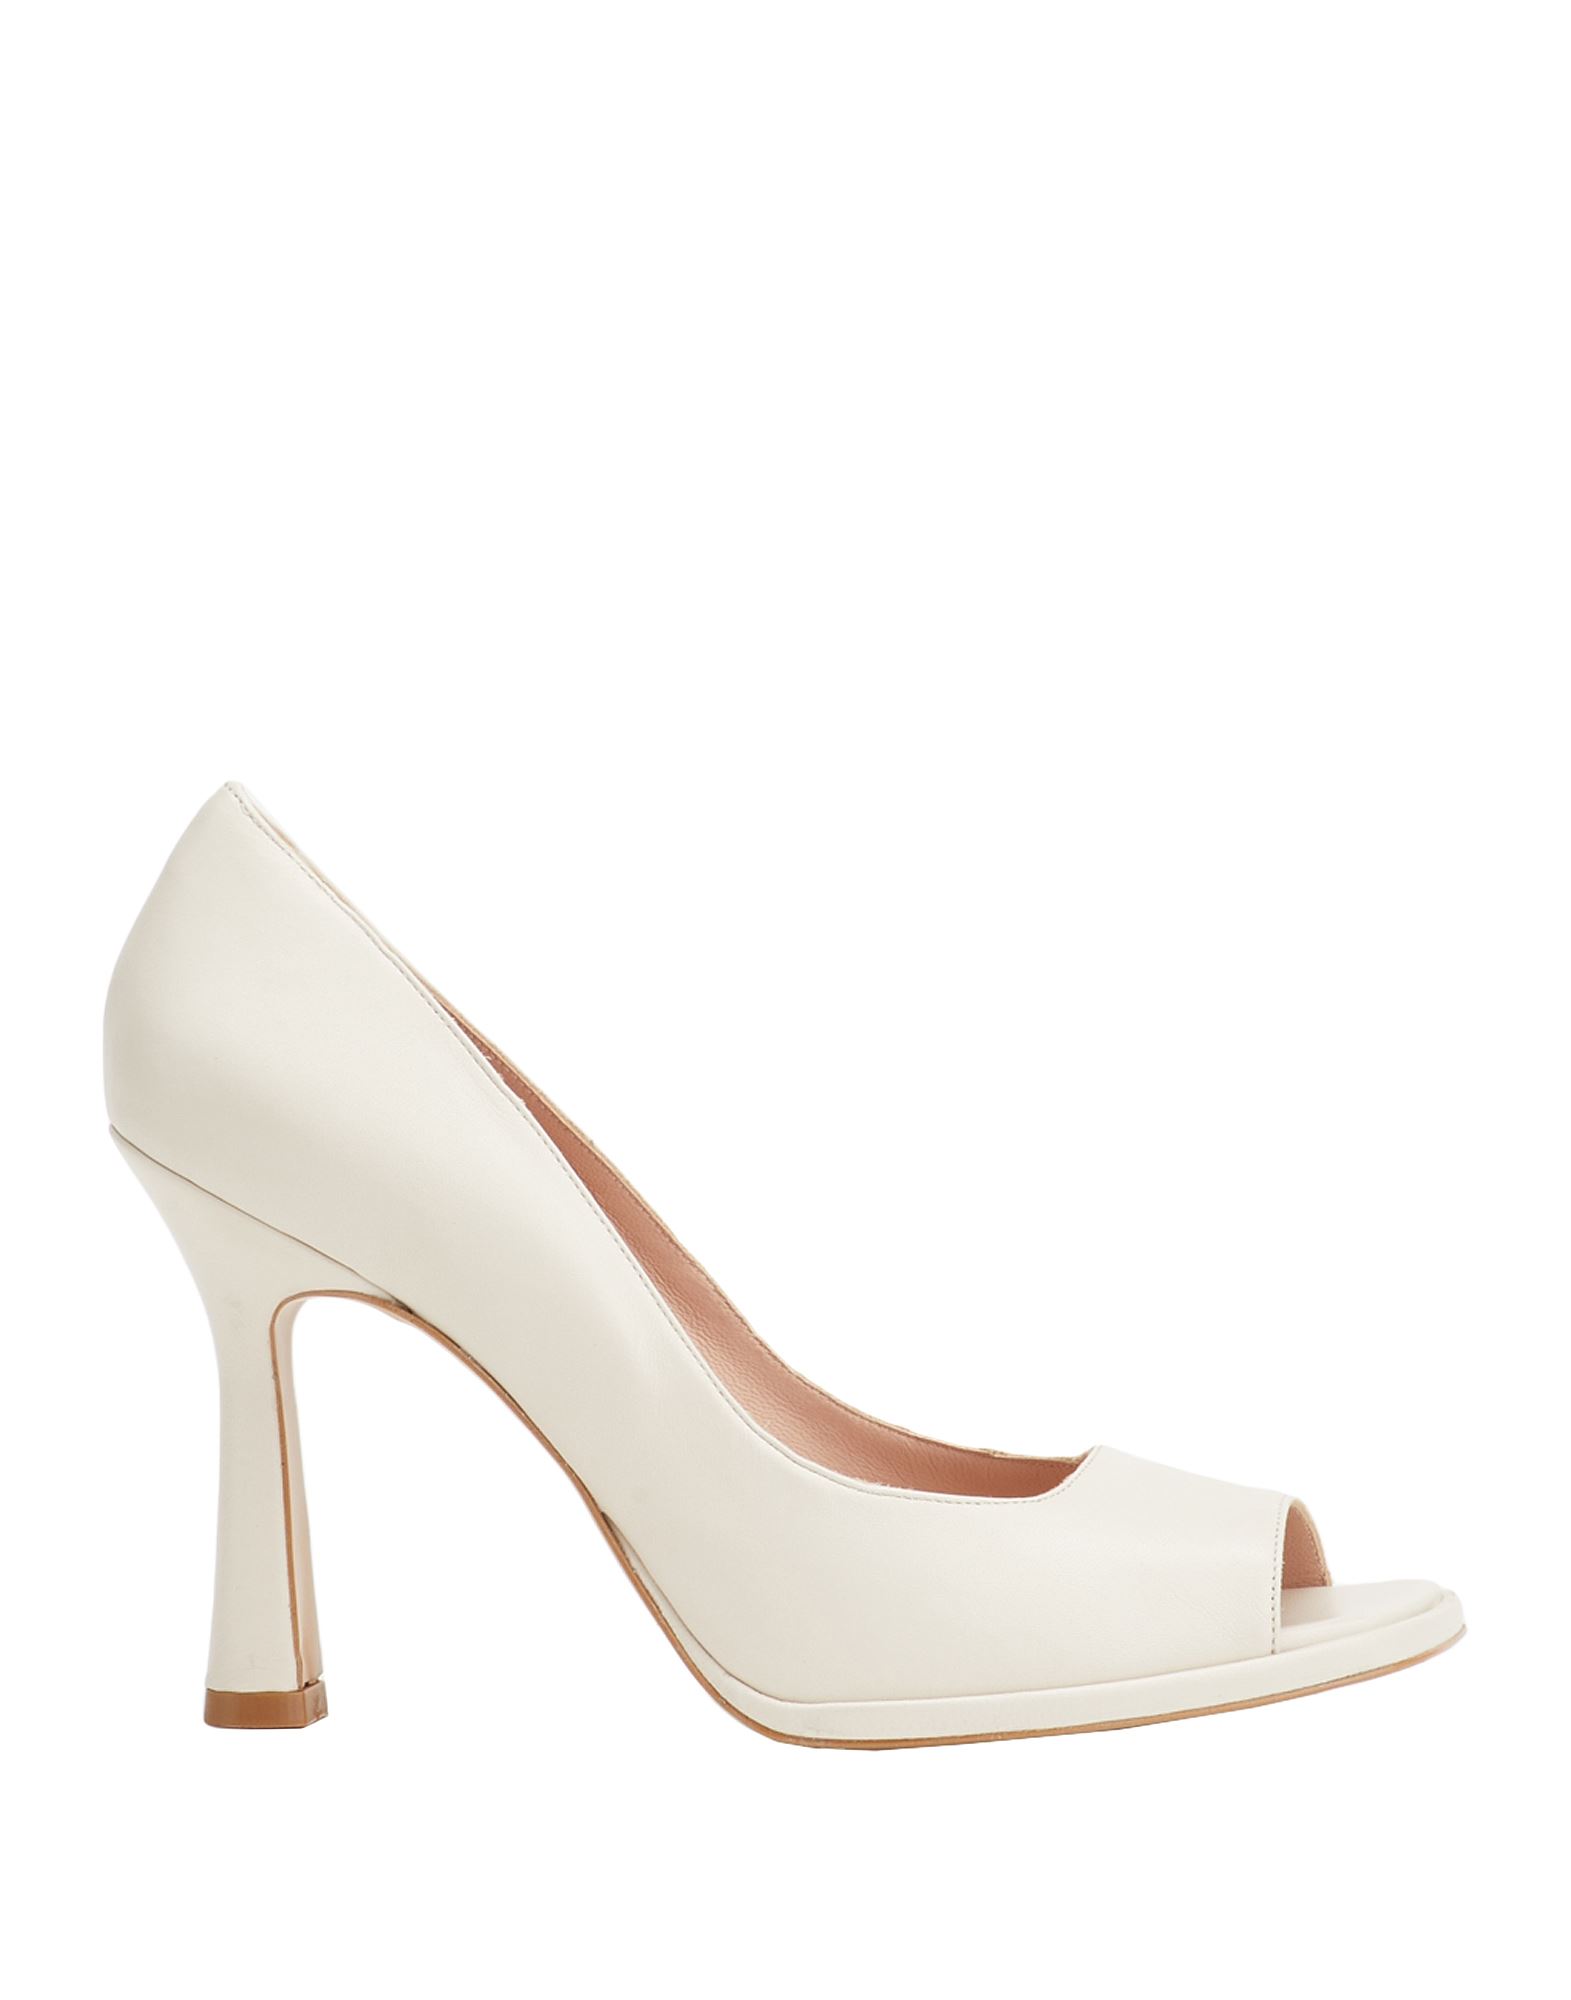 8 By Yoox Pumps In Off White